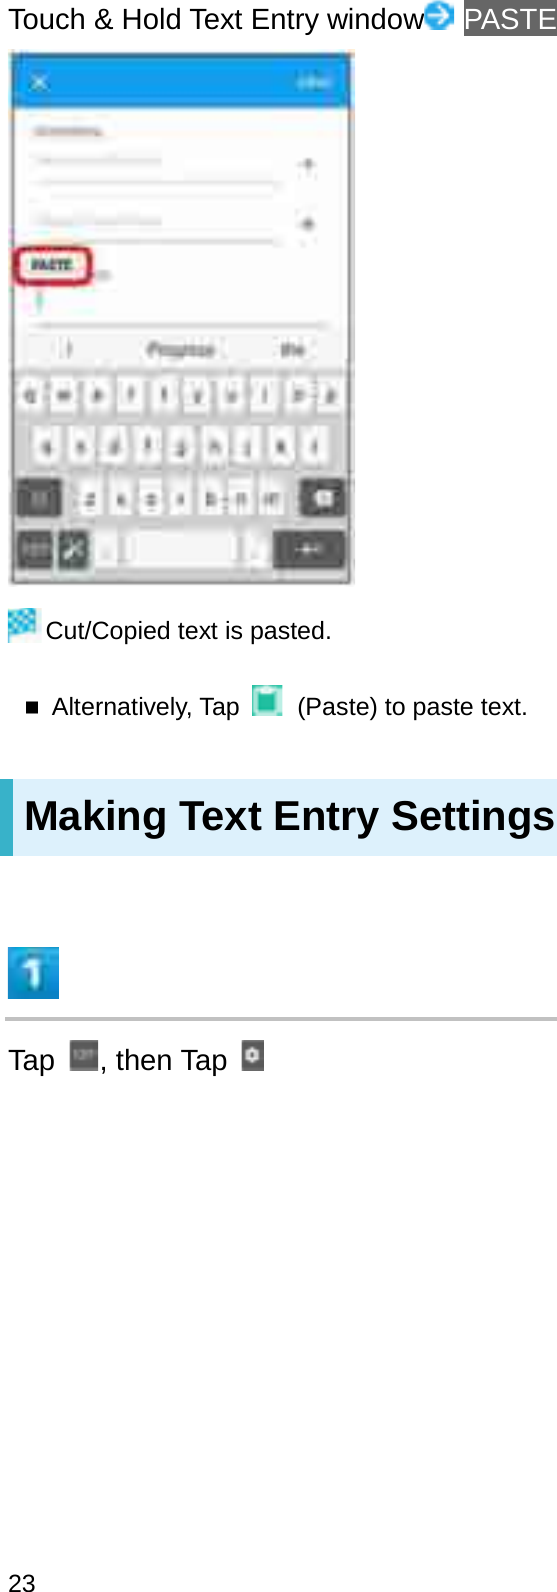 Touch &amp; Hold Text Entry window PASTECut/Copied text is pasted.Alternatively, Tap  (Paste) to paste text.Making Text Entry SettingsTap , then Tap23